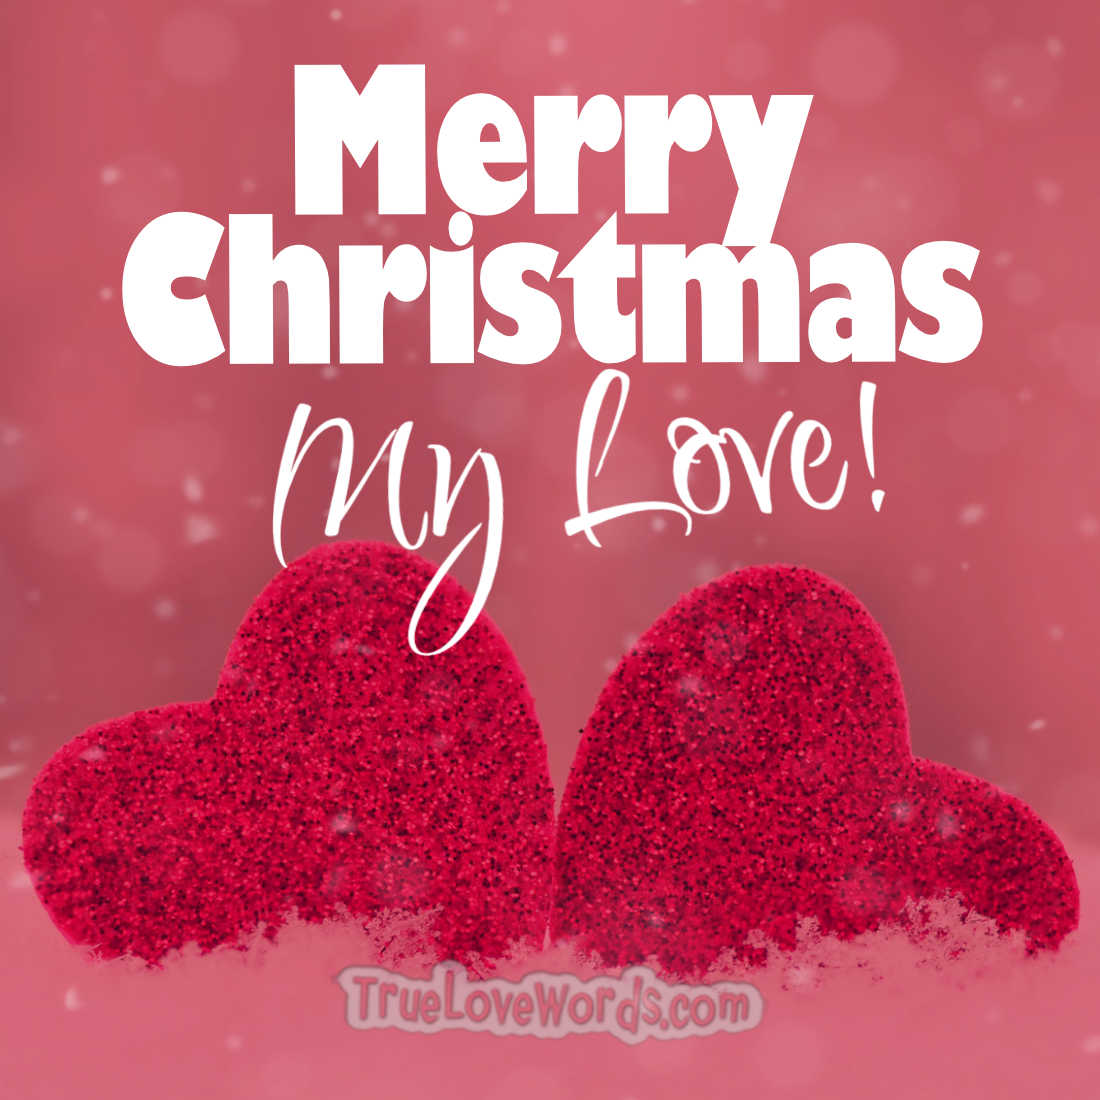 “Extraordinary Compilation of Love Merry Christmas Images in Full 4K Quality – Over 999 to Choose From!”